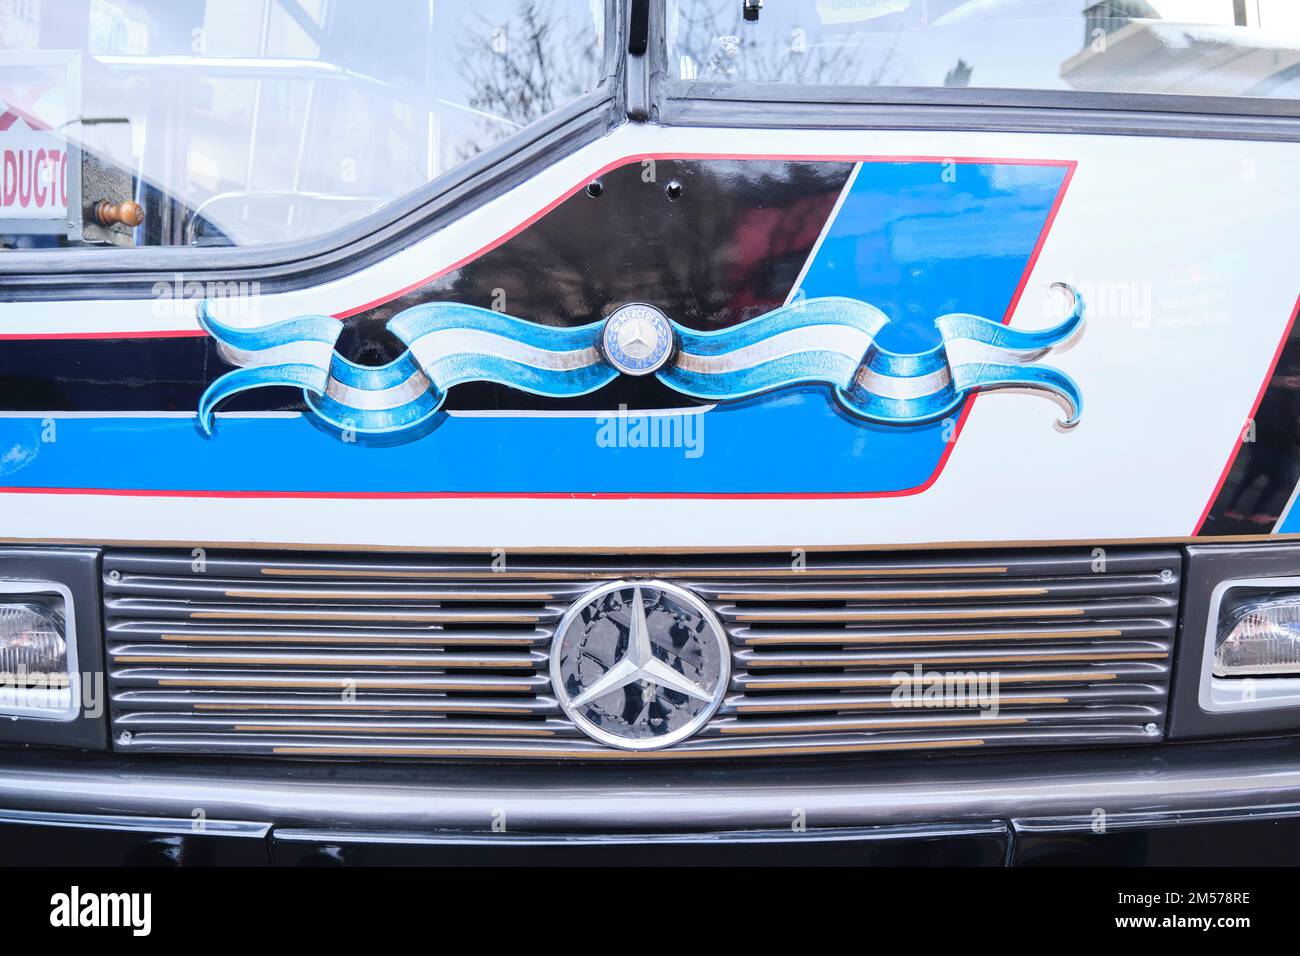 Buenos Aires, Argentina, June 20, 2022: Frontal view of a restored classic Mercedes Benz bus painted with ornaments, flag ribbons, in the fileteado po Stock Photo